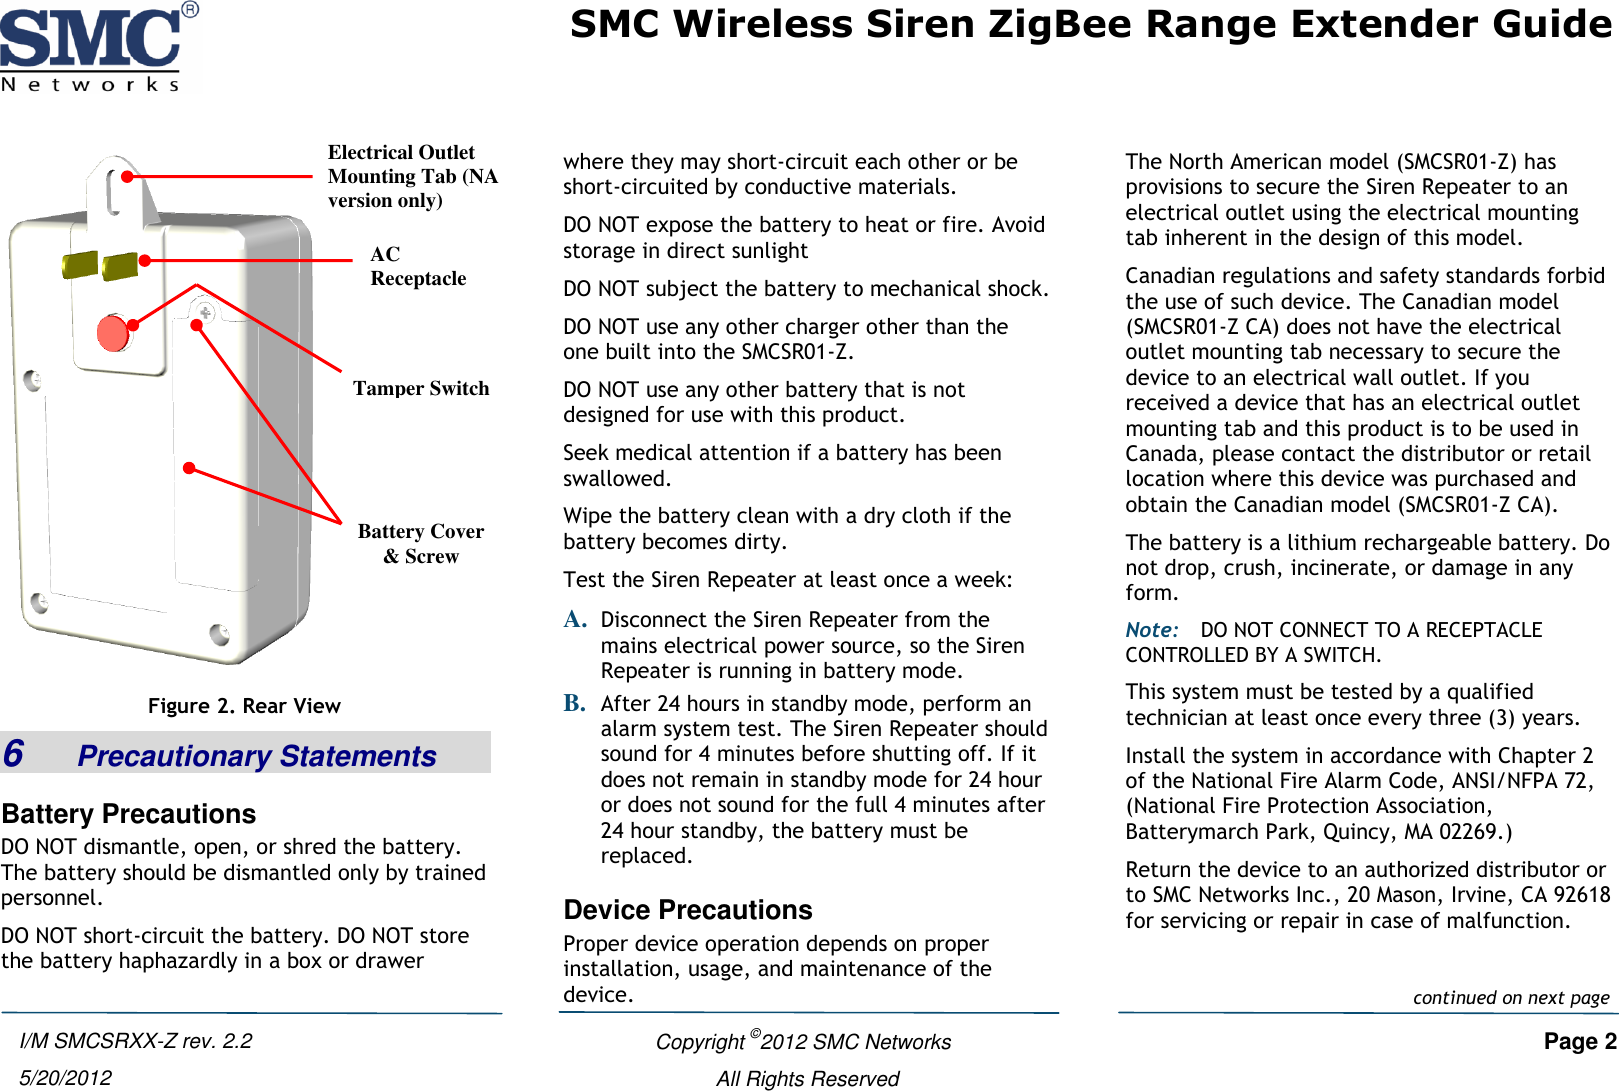 SMC Wireless Siren ZigBee Range Extender Guide   Copyright ©2012 SMC Networks   Page 2 All Rights Reserved I/M SMCSRXX-Z rev. 2.2 5/20/2012  Figure 2. Rear View 6    Precautionary Statements Battery Precautions DO NOT dismantle, open, or shred the battery. The battery should be dismantled only by trained personnel. DO NOT short-circuit the battery. DO NOT store the battery haphazardly in a box or drawer where they may short-circuit each other or be short-circuited by conductive materials. DO NOT expose the battery to heat or fire. Avoid storage in direct sunlight DO NOT subject the battery to mechanical shock. DO NOT use any other charger other than the one built into the SMCSR01-Z. DO NOT use any other battery that is not designed for use with this product. Seek medical attention if a battery has been swallowed. Wipe the battery clean with a dry cloth if the battery becomes dirty. Test the Siren Repeater at least once a week: A. Disconnect the Siren Repeater from the mains electrical power source, so the Siren Repeater is running in battery mode. B. After 24 hours in standby mode, perform an alarm system test. The Siren Repeater should sound for 4 minutes before shutting off. If it does not remain in standby mode for 24 hour or does not sound for the full 4 minutes after 24 hour standby, the battery must be replaced. Device Precautions Proper device operation depends on proper installation, usage, and maintenance of the device. The North American model (SMCSR01-Z) has provisions to secure the Siren Repeater to an electrical outlet using the electrical mounting tab inherent in the design of this model. Canadian regulations and safety standards forbid the use of such device. The Canadian model (SMCSR01-Z CA) does not have the electrical outlet mounting tab necessary to secure the device to an electrical wall outlet. If you received a device that has an electrical outlet mounting tab and this product is to be used in Canada, please contact the distributor or retail location where this device was purchased and obtain the Canadian model (SMCSR01-Z CA). The battery is a lithium rechargeable battery. Do not drop, crush, incinerate, or damage in any form. Note: DO NOT CONNECT TO A RECEPTACLE CONTROLLED BY A SWITCH. This system must be tested by a qualified technician at least once every three (3) years. Install the system in accordance with Chapter 2 of the National Fire Alarm Code, ANSI/NFPA 72, (National Fire Protection Association, Batterymarch Park, Quincy, MA 02269.) Return the device to an authorized distributor or to SMC Networks Inc., 20 Mason, Irvine, CA 92618 for servicing or repair in case of malfunction.Electrical Outlet Mounting Tab (NA version only) AC Receptacle Tamper Switch Battery Cover &amp; Screw  continued on next page 